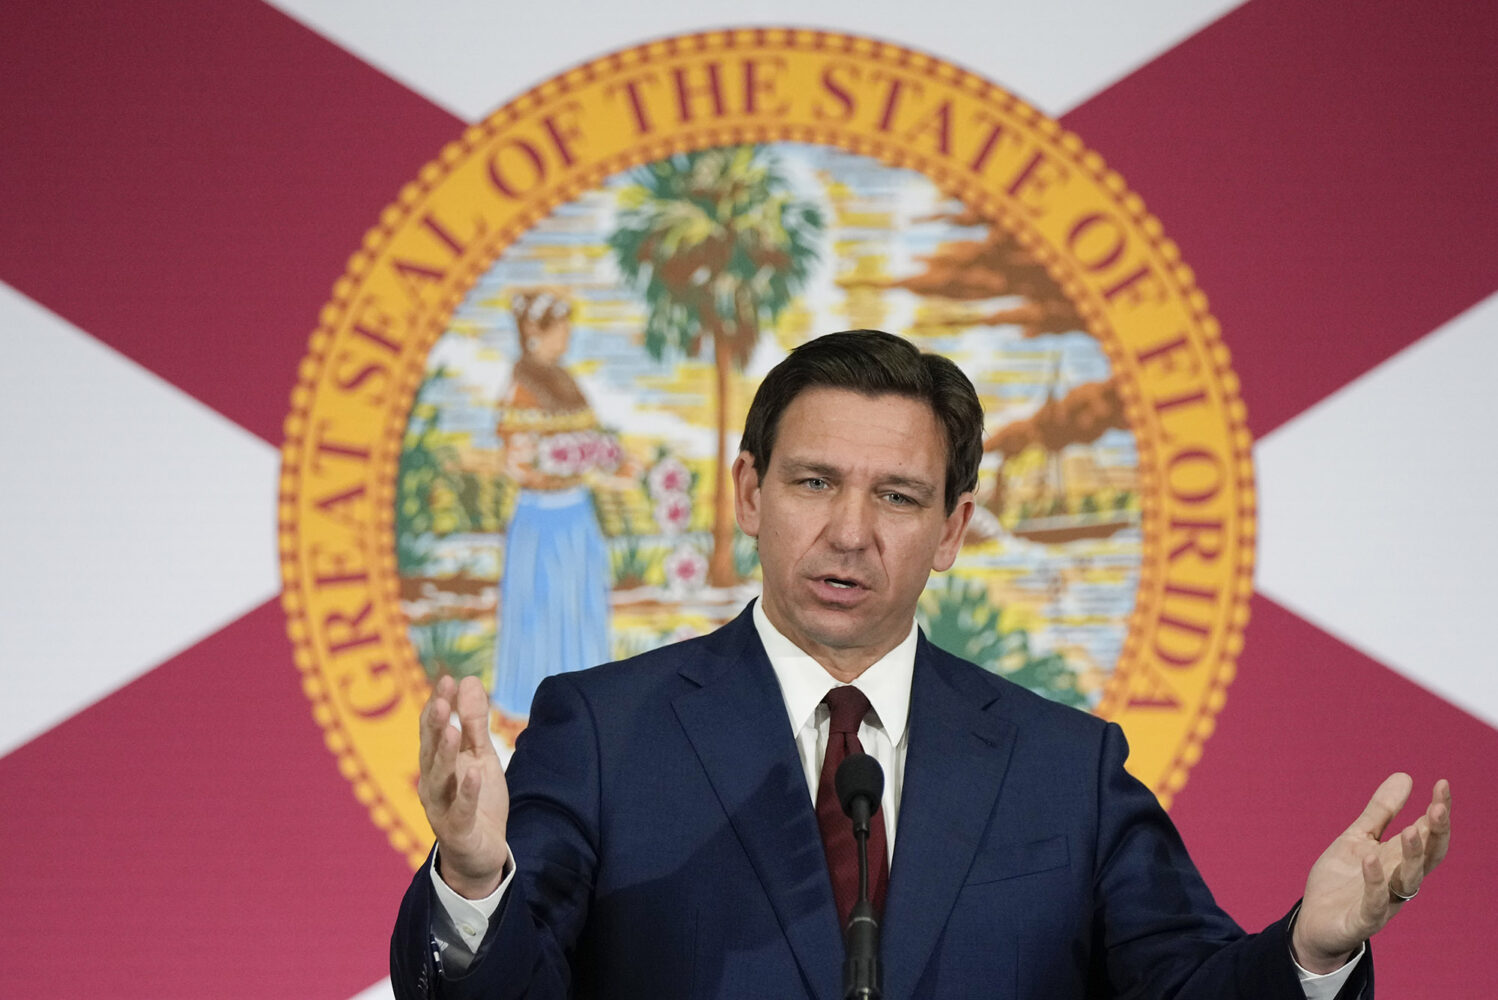 Photo: Ron DeSantis, a white man, stands in front of a banner with Florida's emblem addressing a crowd. He wears a basic navy suit with a red tie.